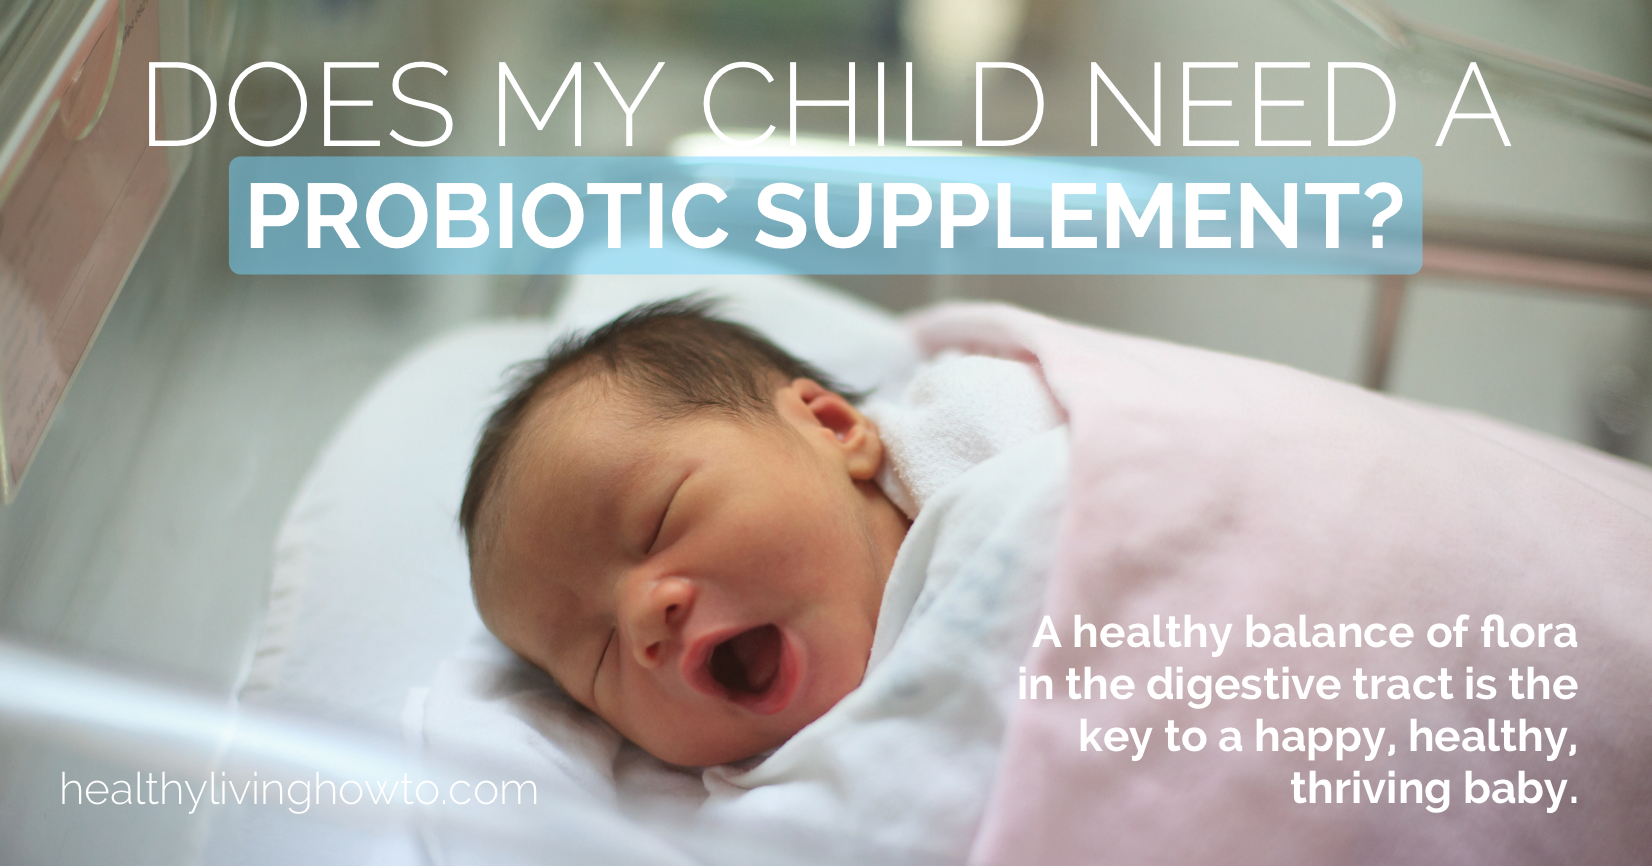 Does My Child Need A Probiotic Supplement? | healthylivinghowto.com